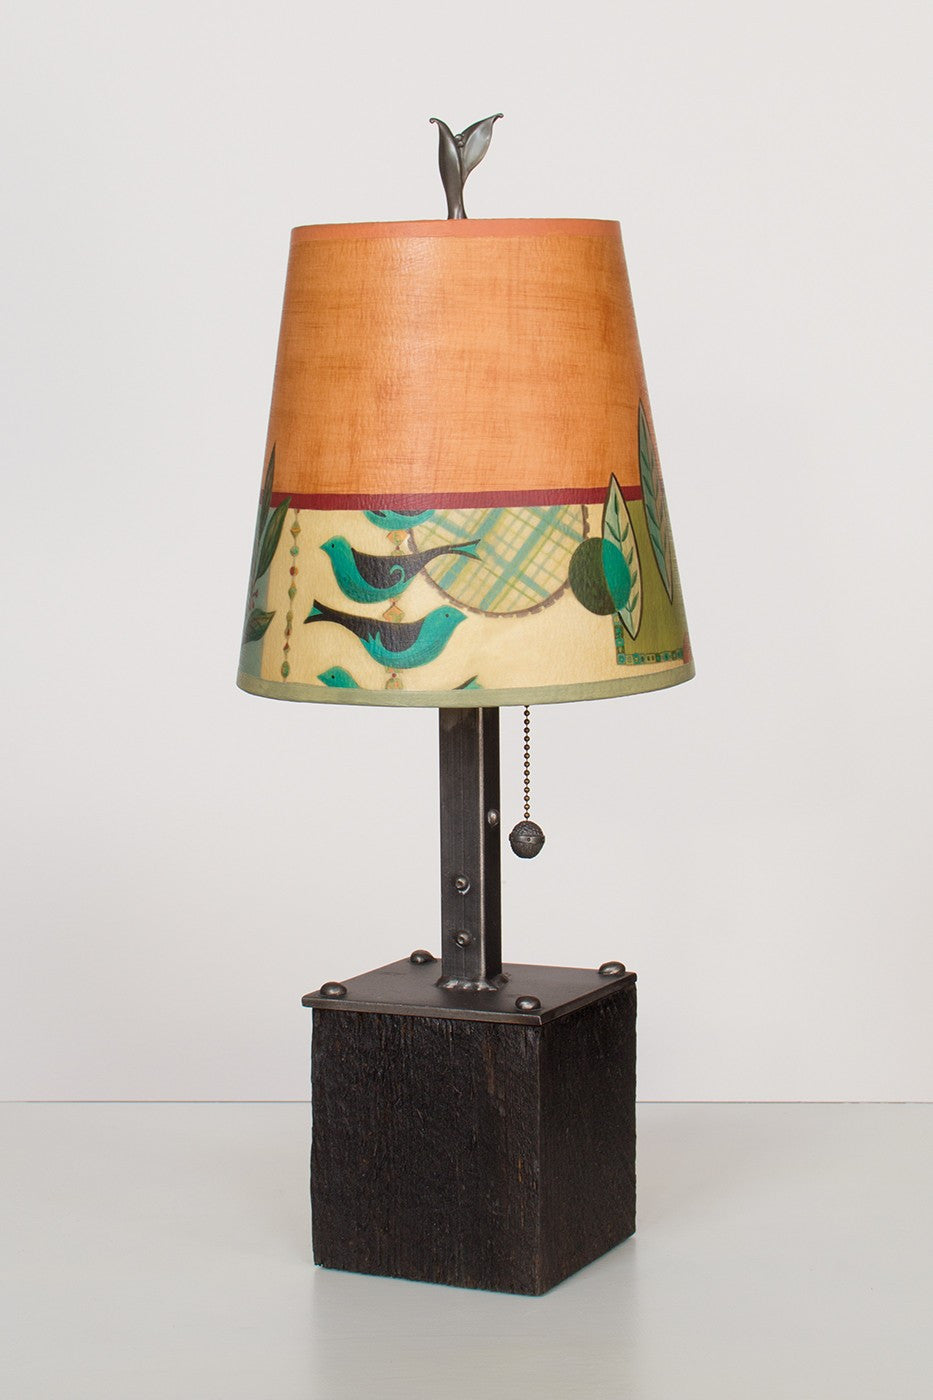 Steel Table Lamp on Wood with Small Drum Shade in New Capri Spice - True North Gallery